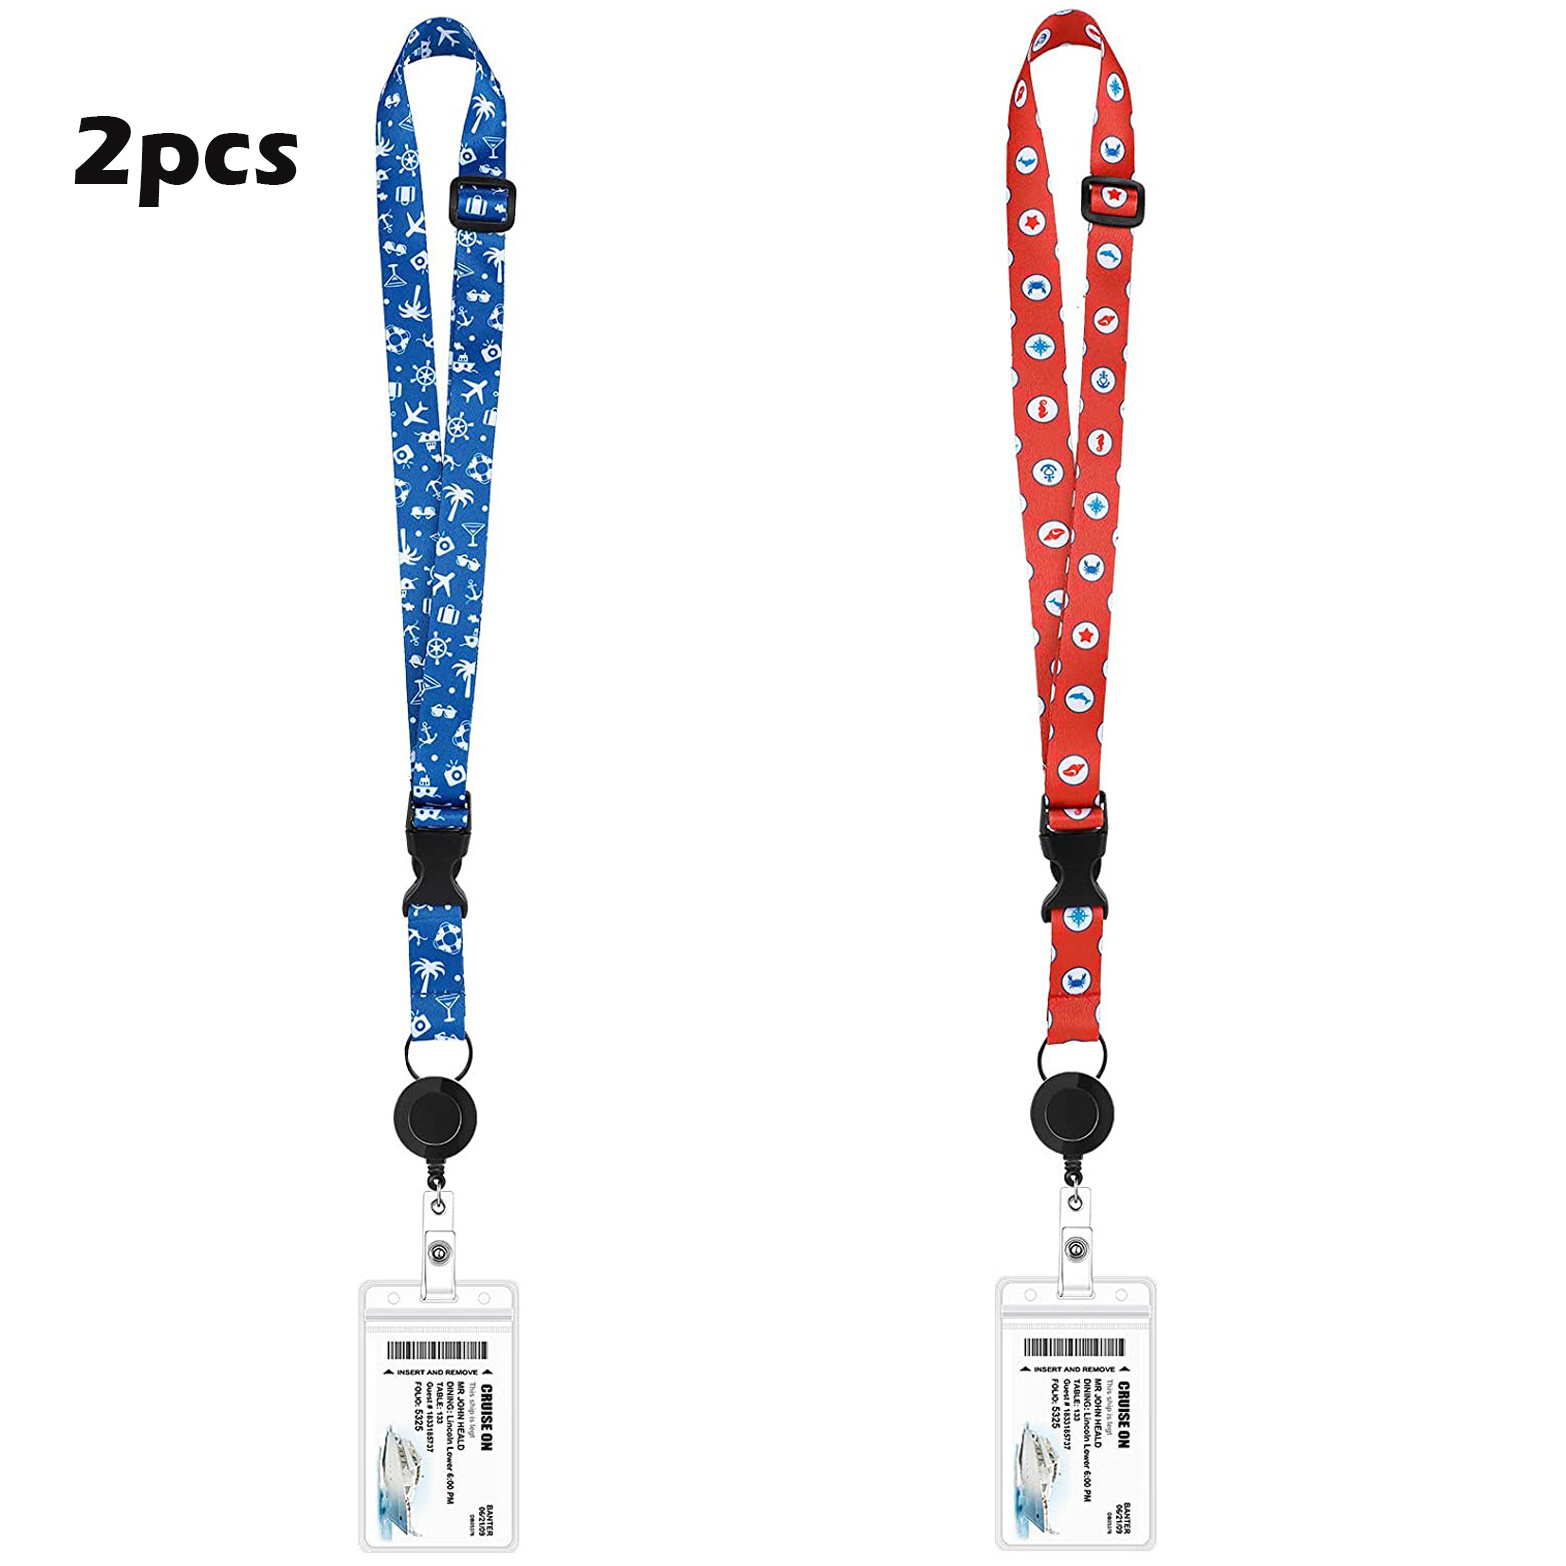 Cruise Lanyards with ID Holder, Retractable Badge & Waterproof Card Holders  (Blue Ship)